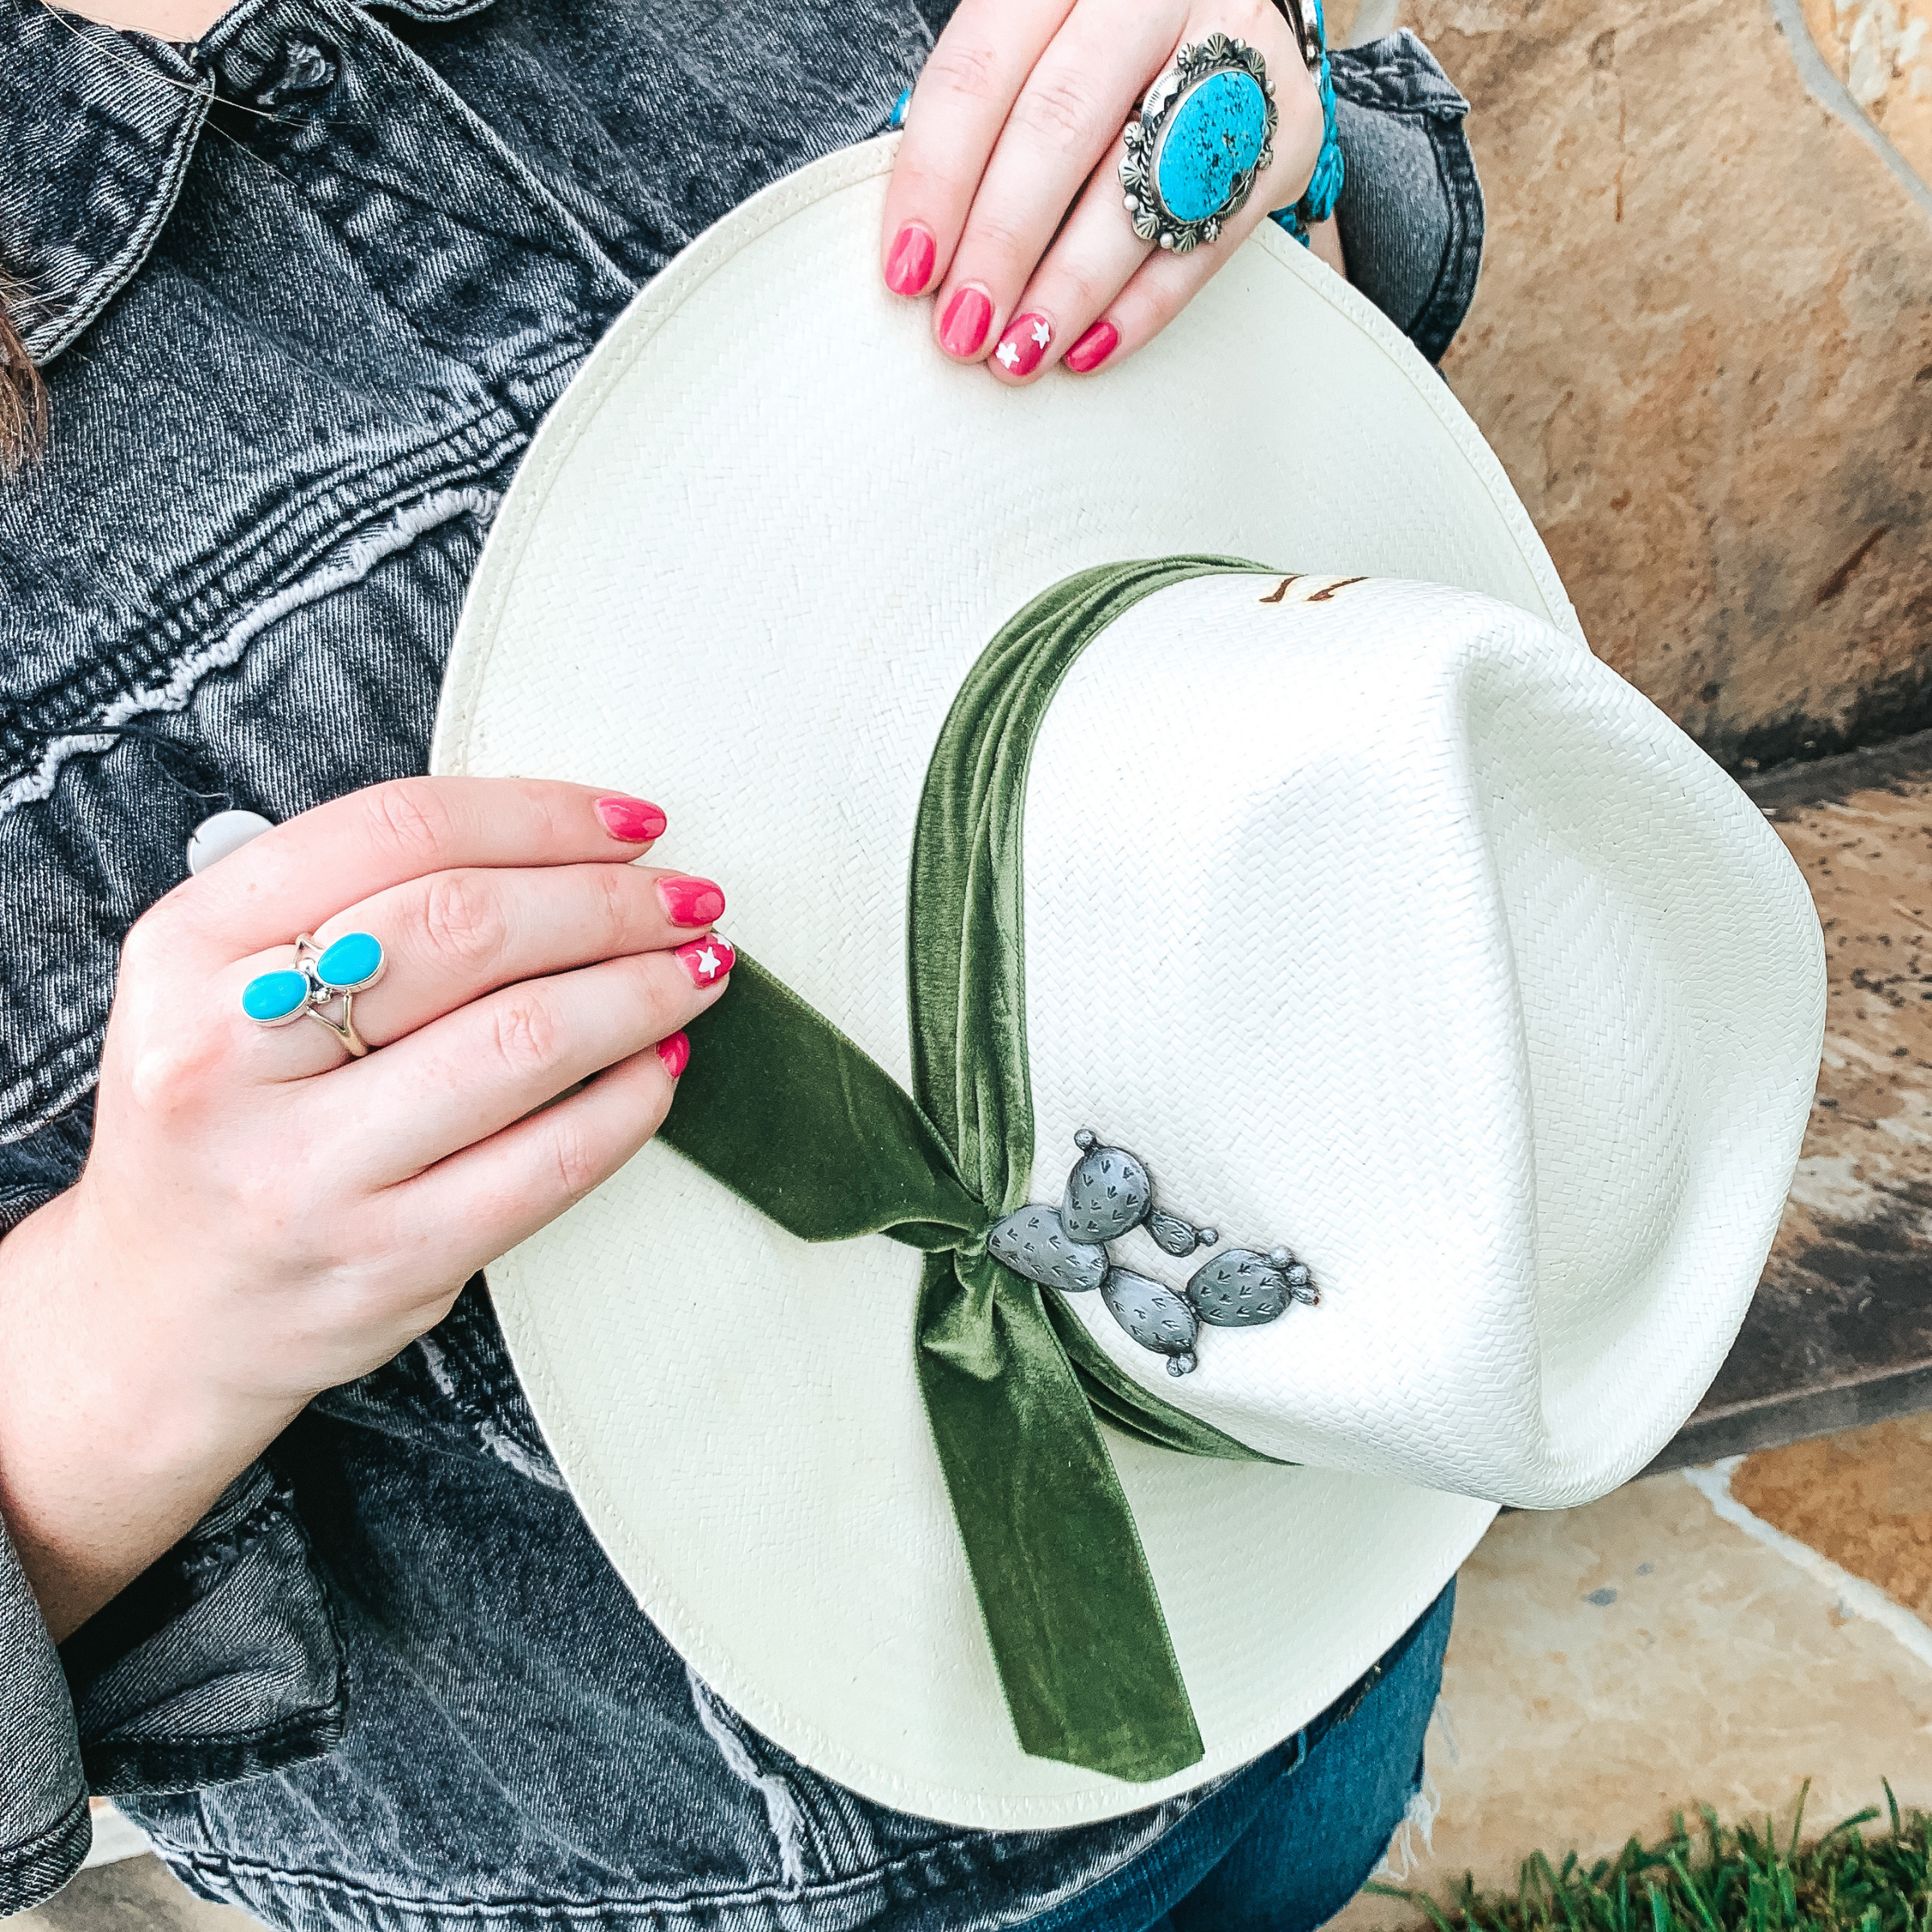 Charlie 1 Horse | Hard to Handle Straw Hat with Olive Green Velvet Ribbon Band and Barbosa Cactus Concho Pin - Giddy Up Glamour Boutique